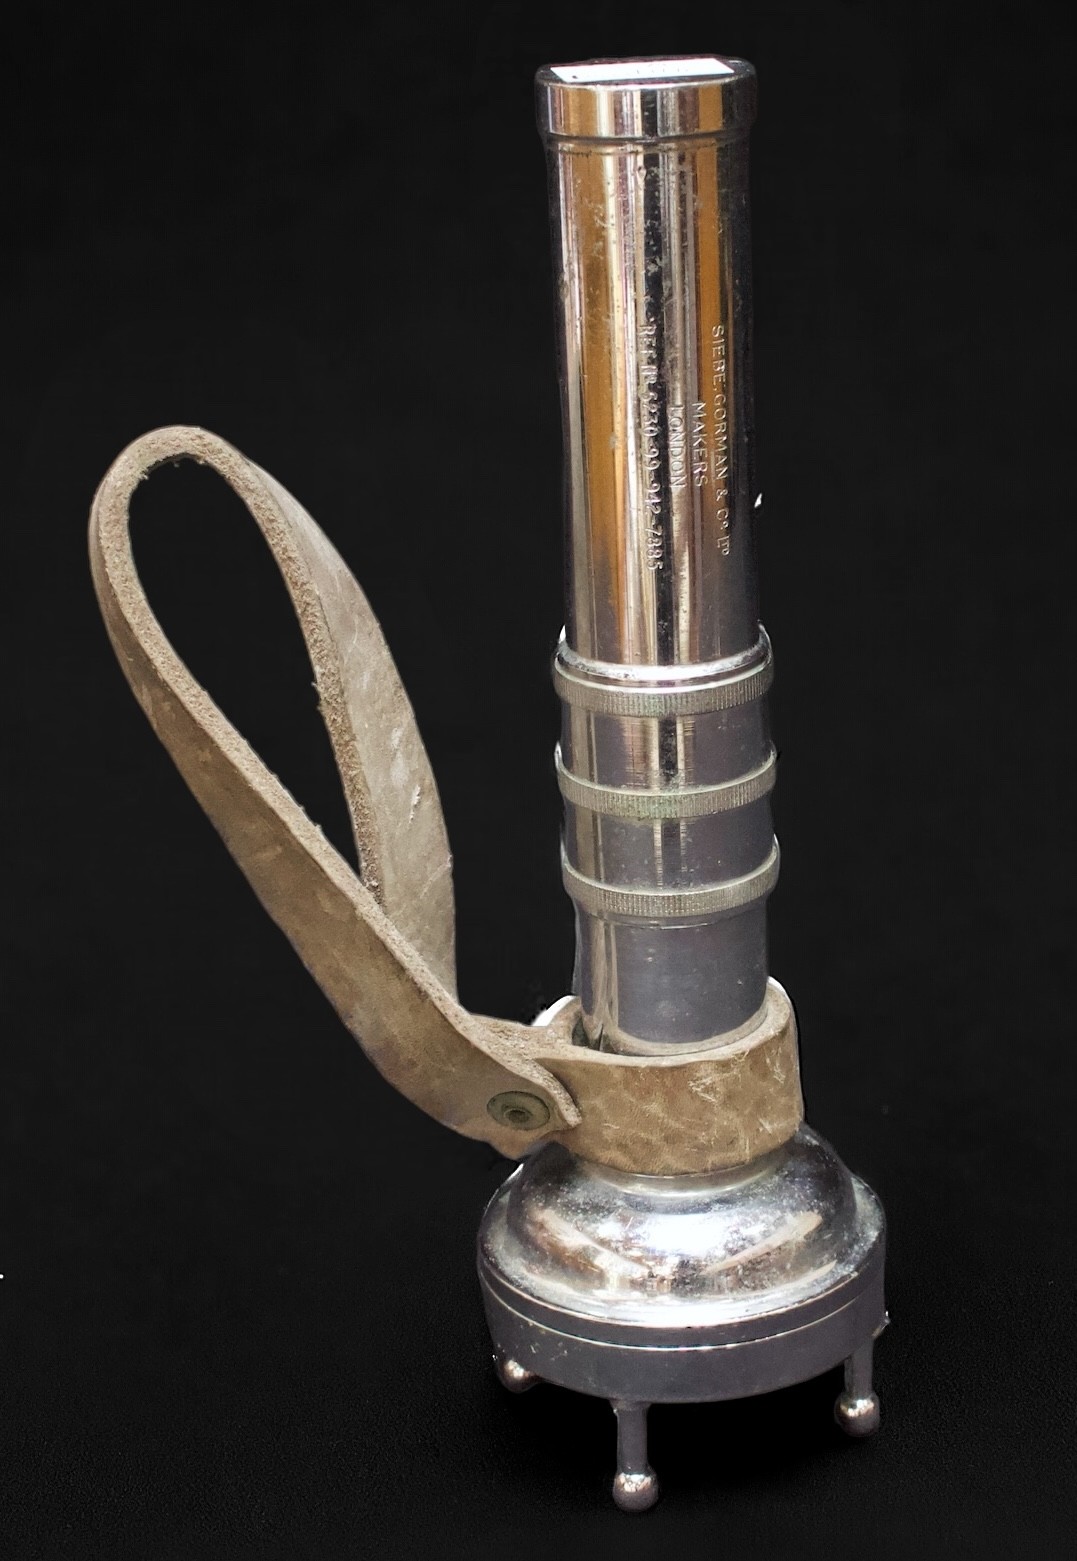 A chromium-plated four-pronged diving torch by Siebe Gorman & Co Ltd, with leather lanyard, 28cm